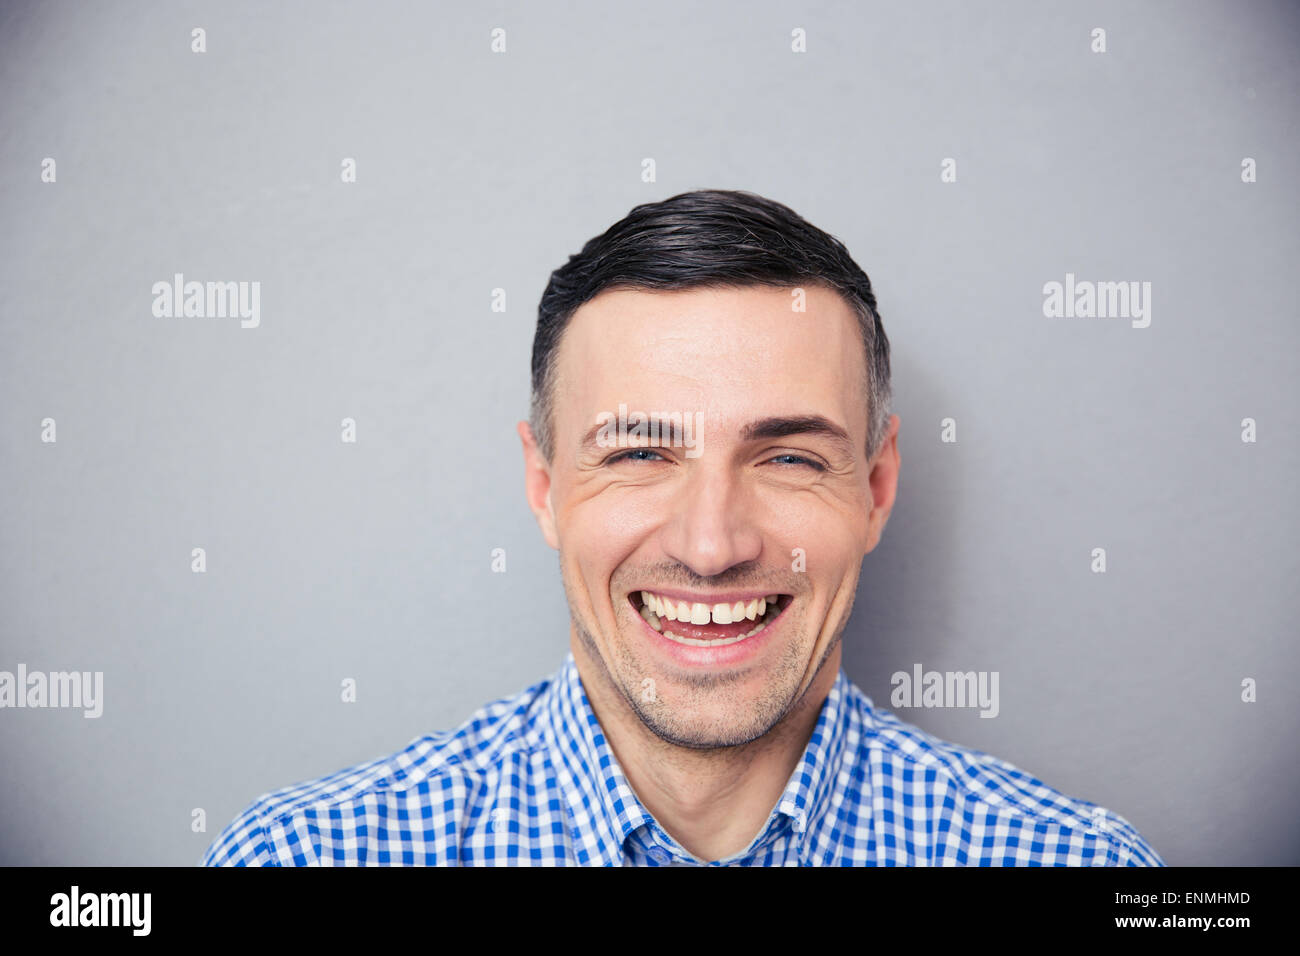 Portrait of a laughing man over gray background. Looking at camera Stock Photo